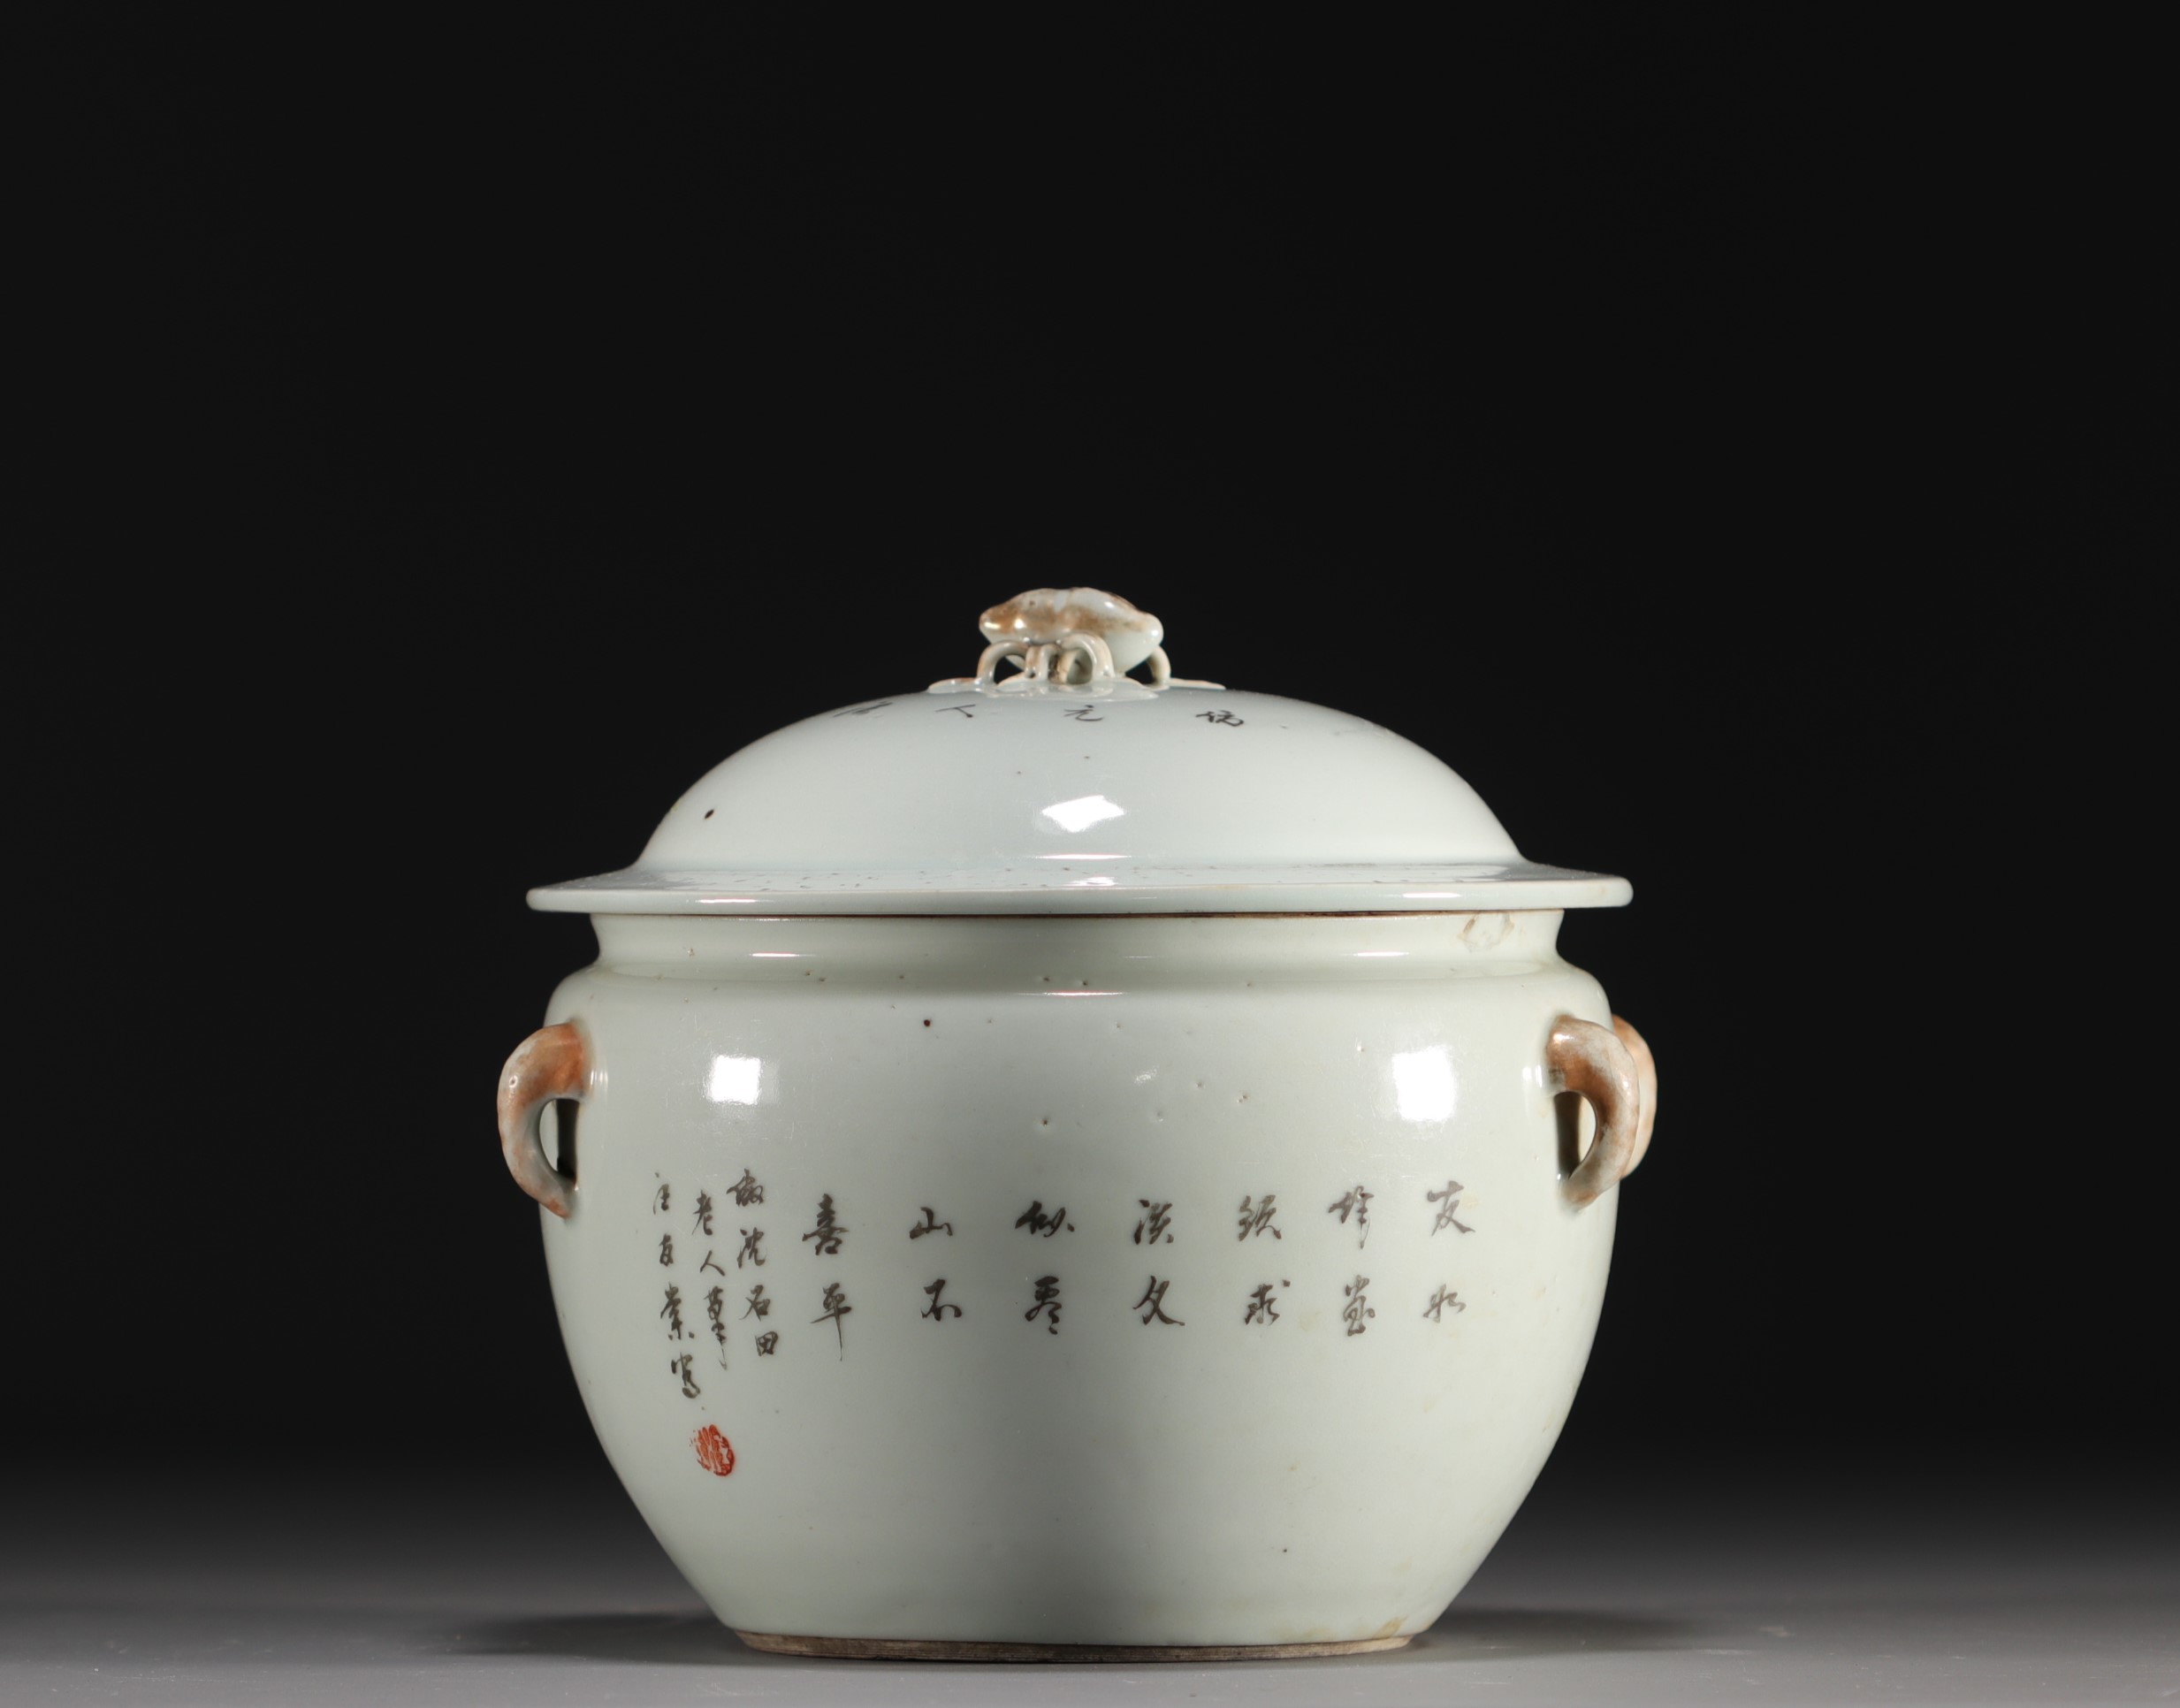 China - Tureen made of porcelain decorated with landscapes, 19th century. - Image 4 of 5